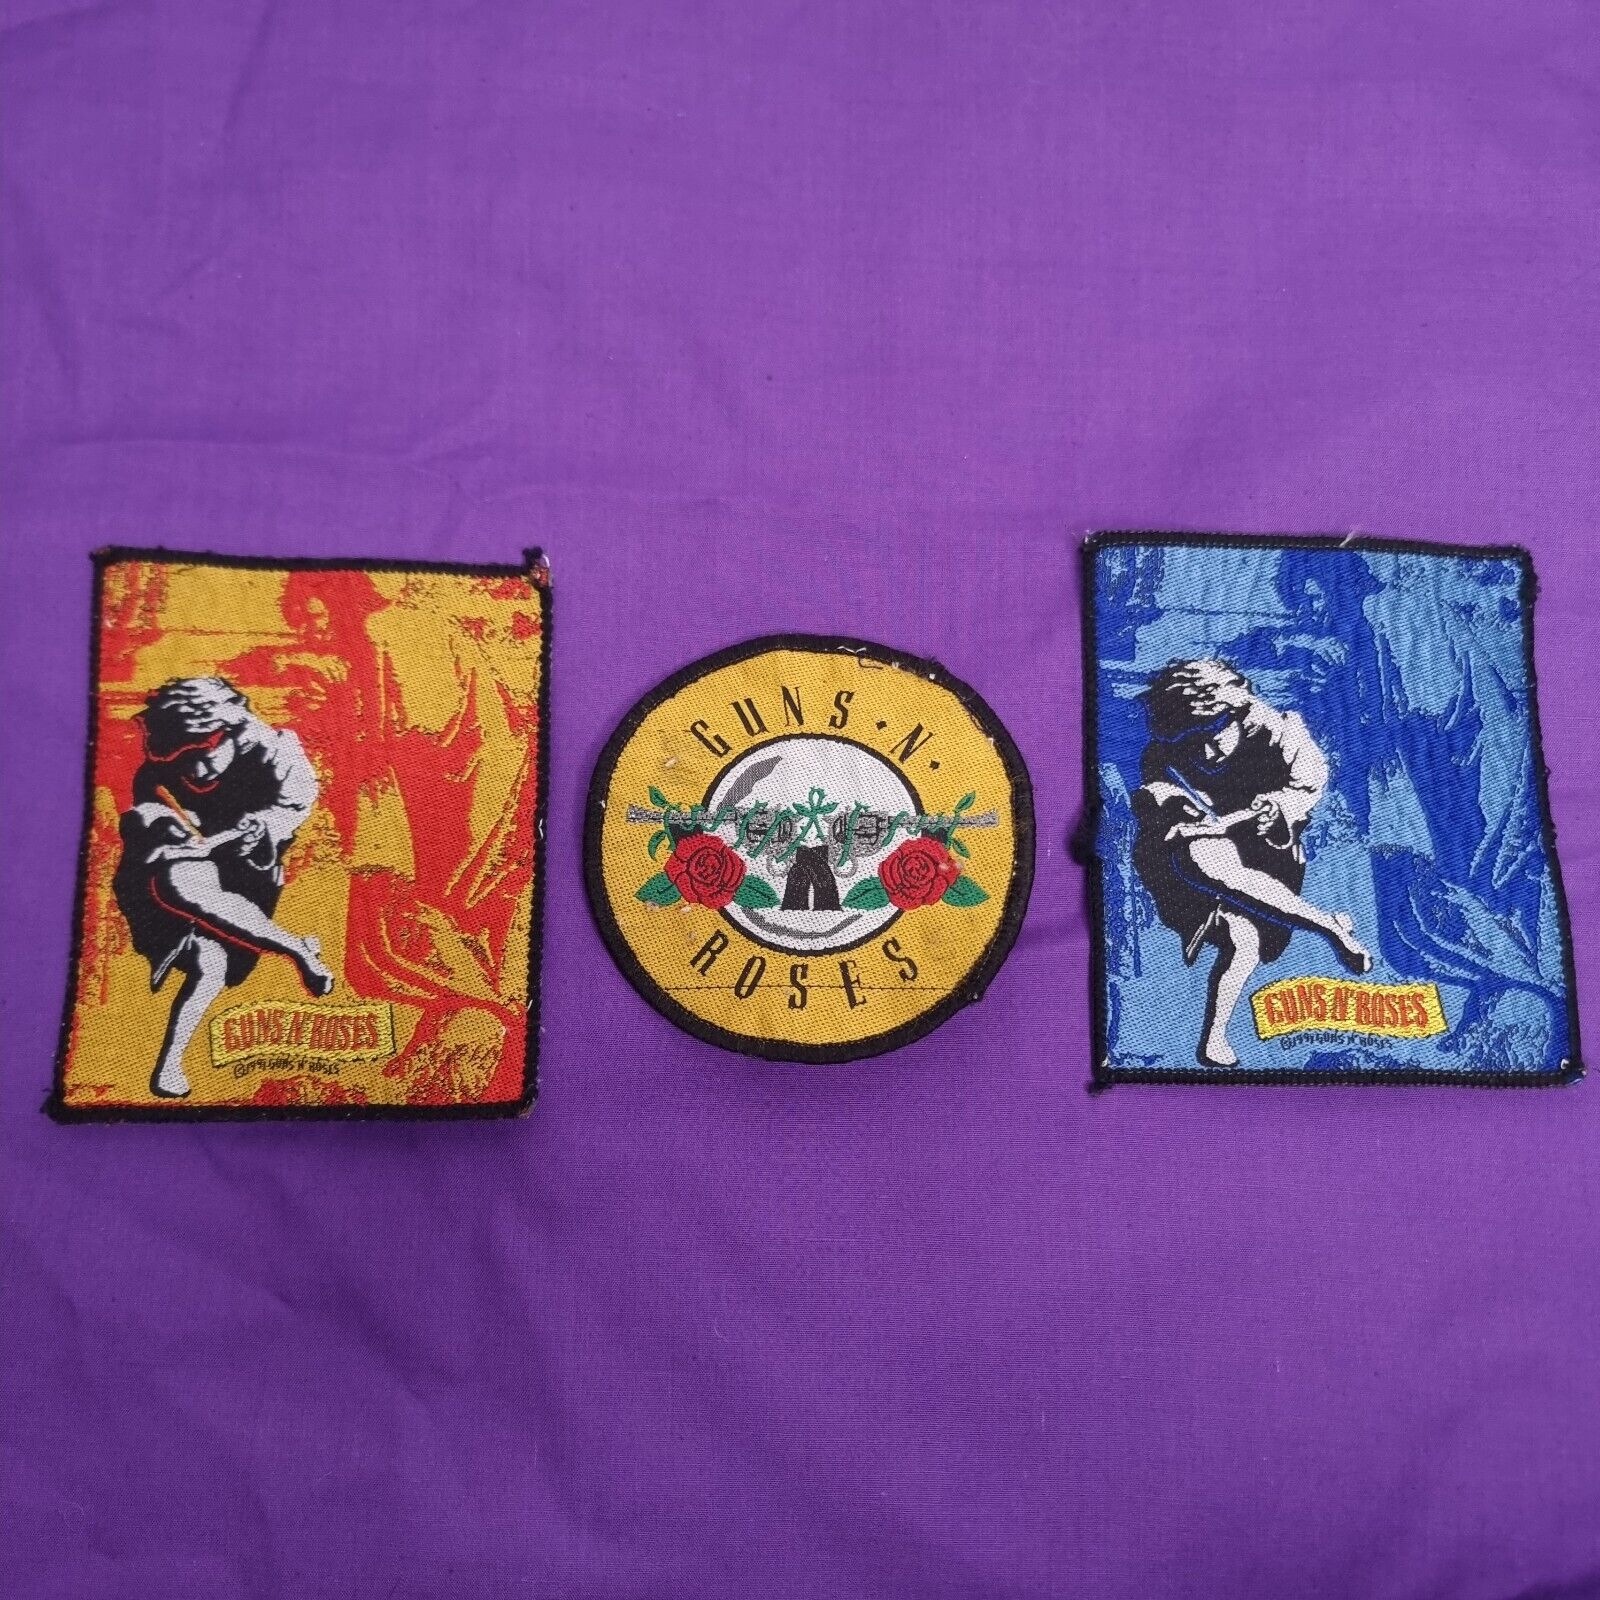 Guns N Roses Use Your Illusion 1991 Patches Sew On 